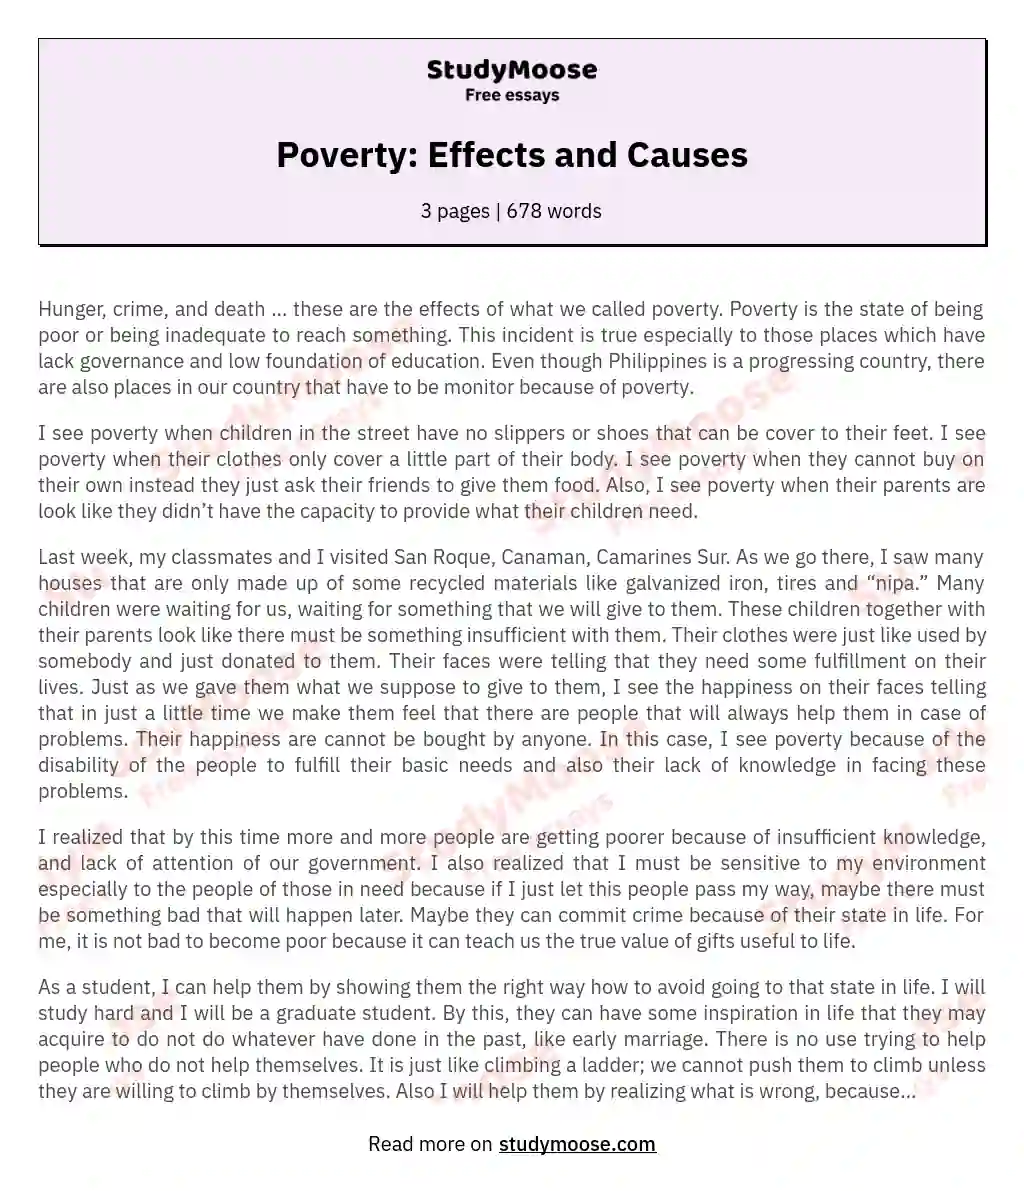 causes of poverty essay